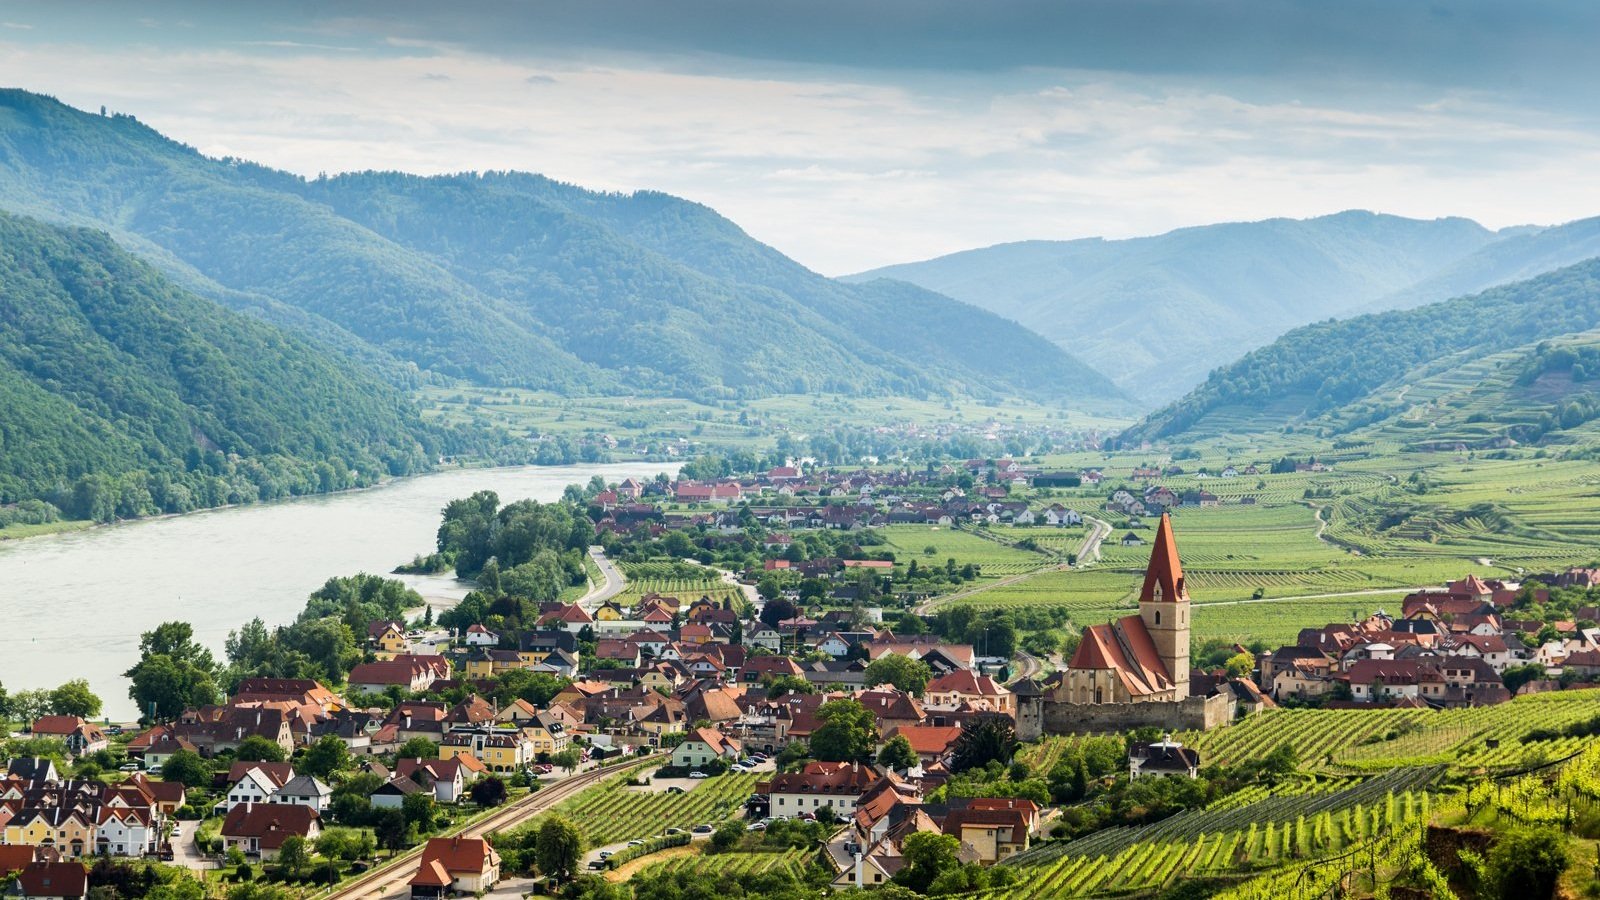 Vineyards and views in the tranquil Wachau Valley